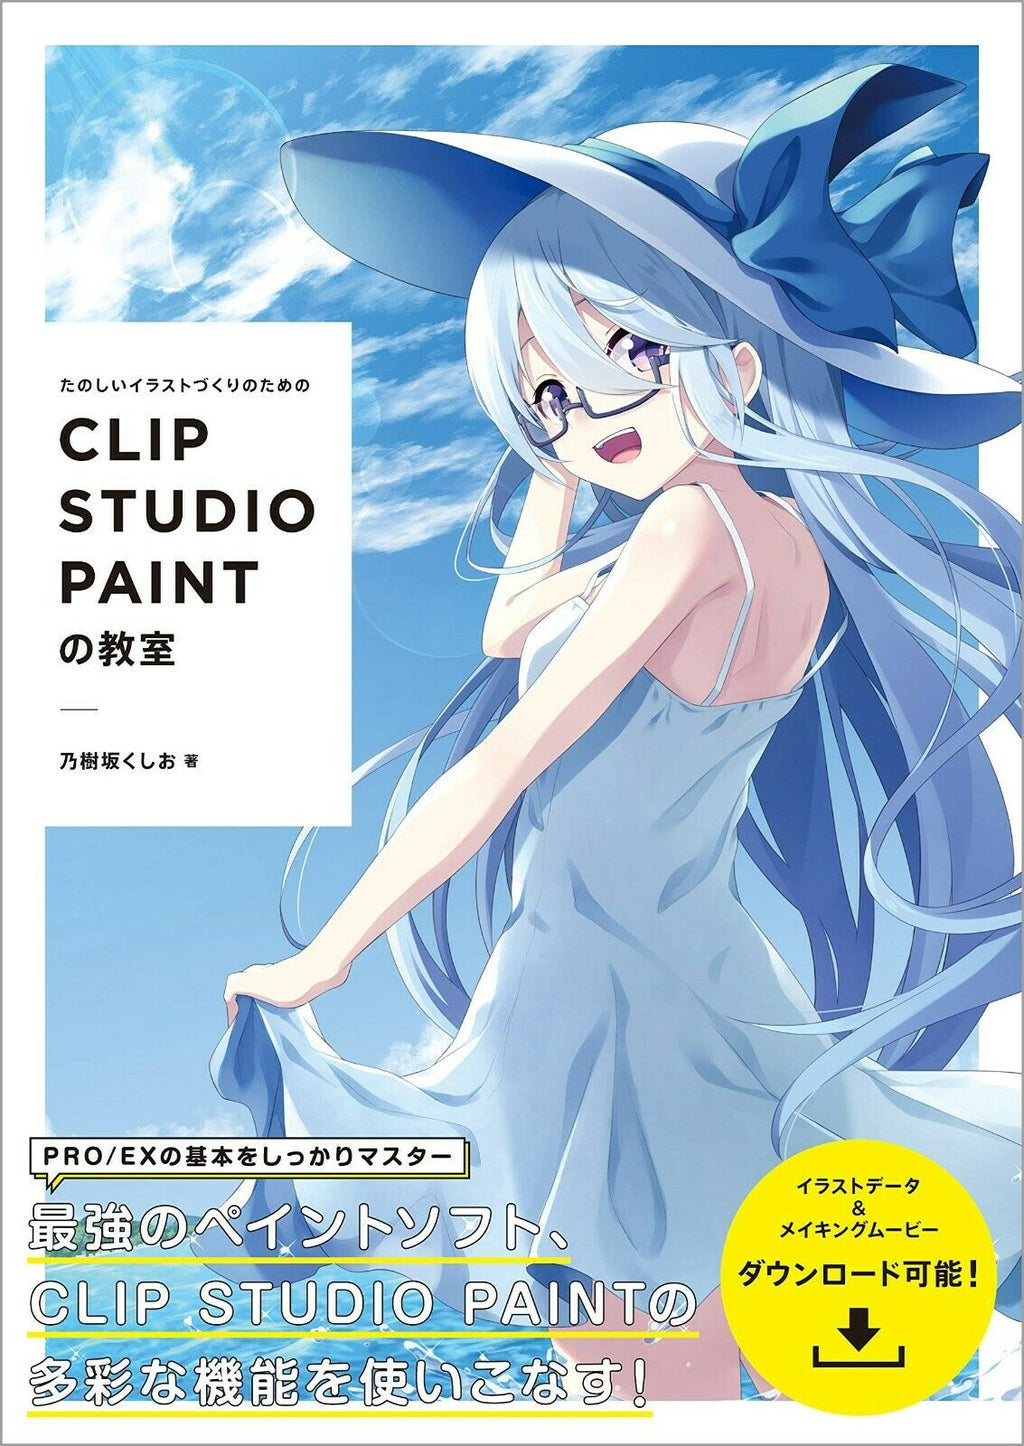 NEW How To Draw Manga CLIP STUDIO PAINT Guide Book | Japan art Illustration